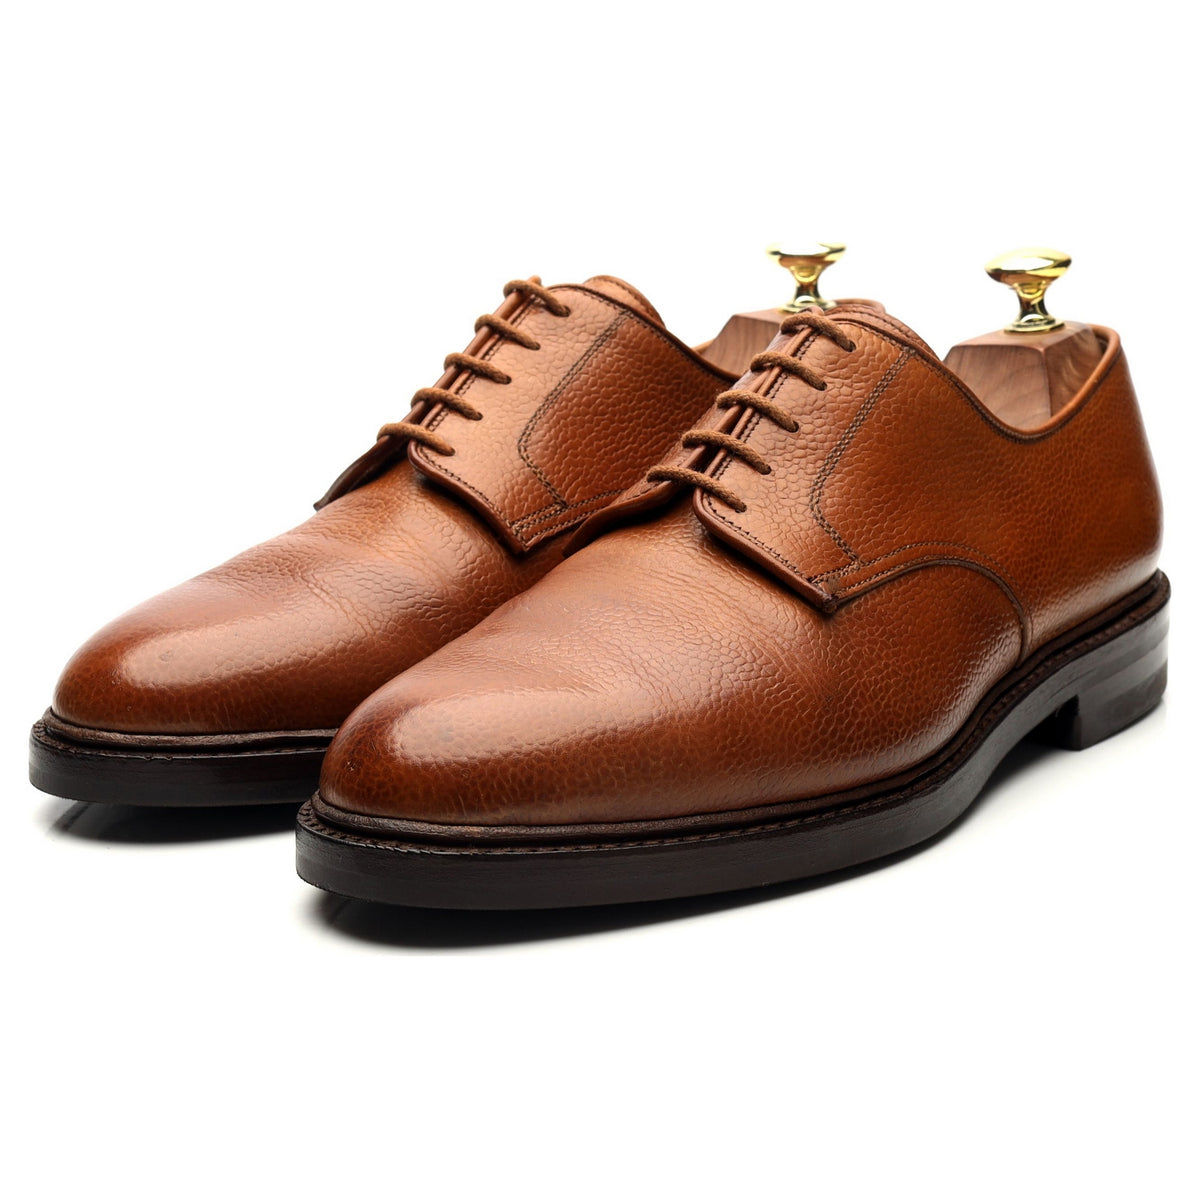 &#39;Grasmere&#39; Tan Brown Leather Derby UK 7.5 E